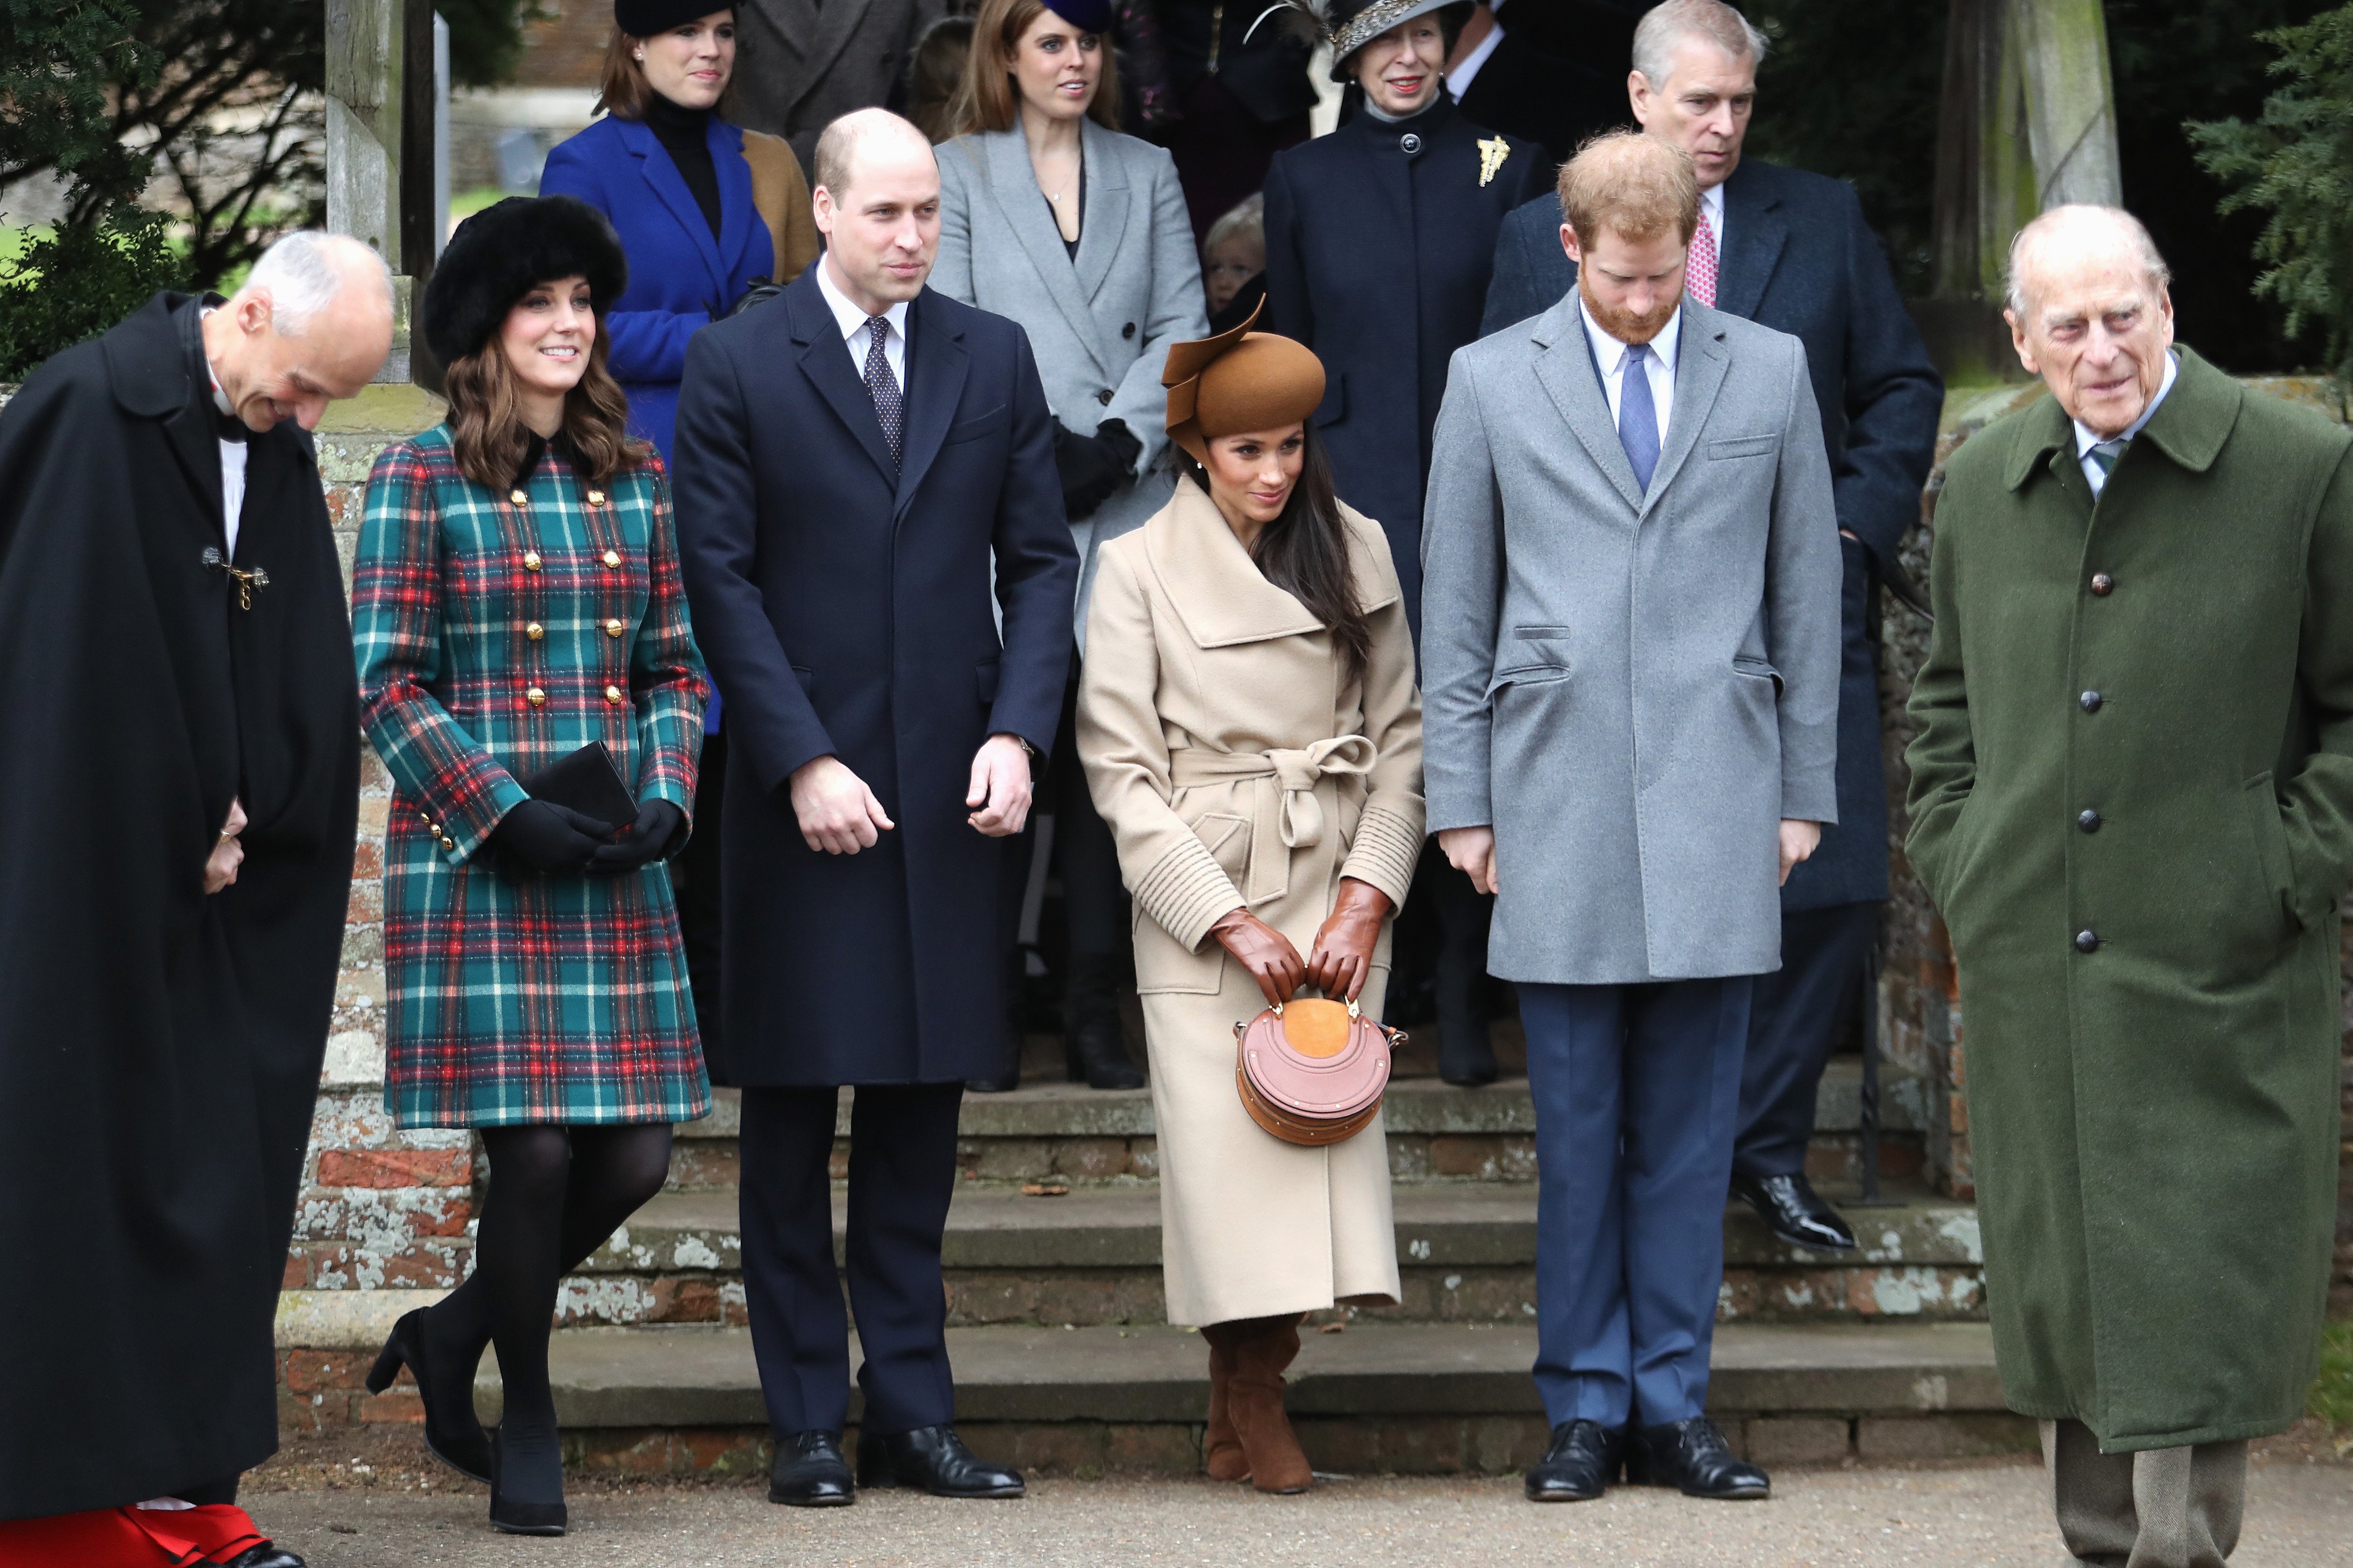 The Royal family attend Christmas Day Church service at Church of St Mary Magdalene on December 25, 2017 in King's Lynn, England. | Source: Getty Images.